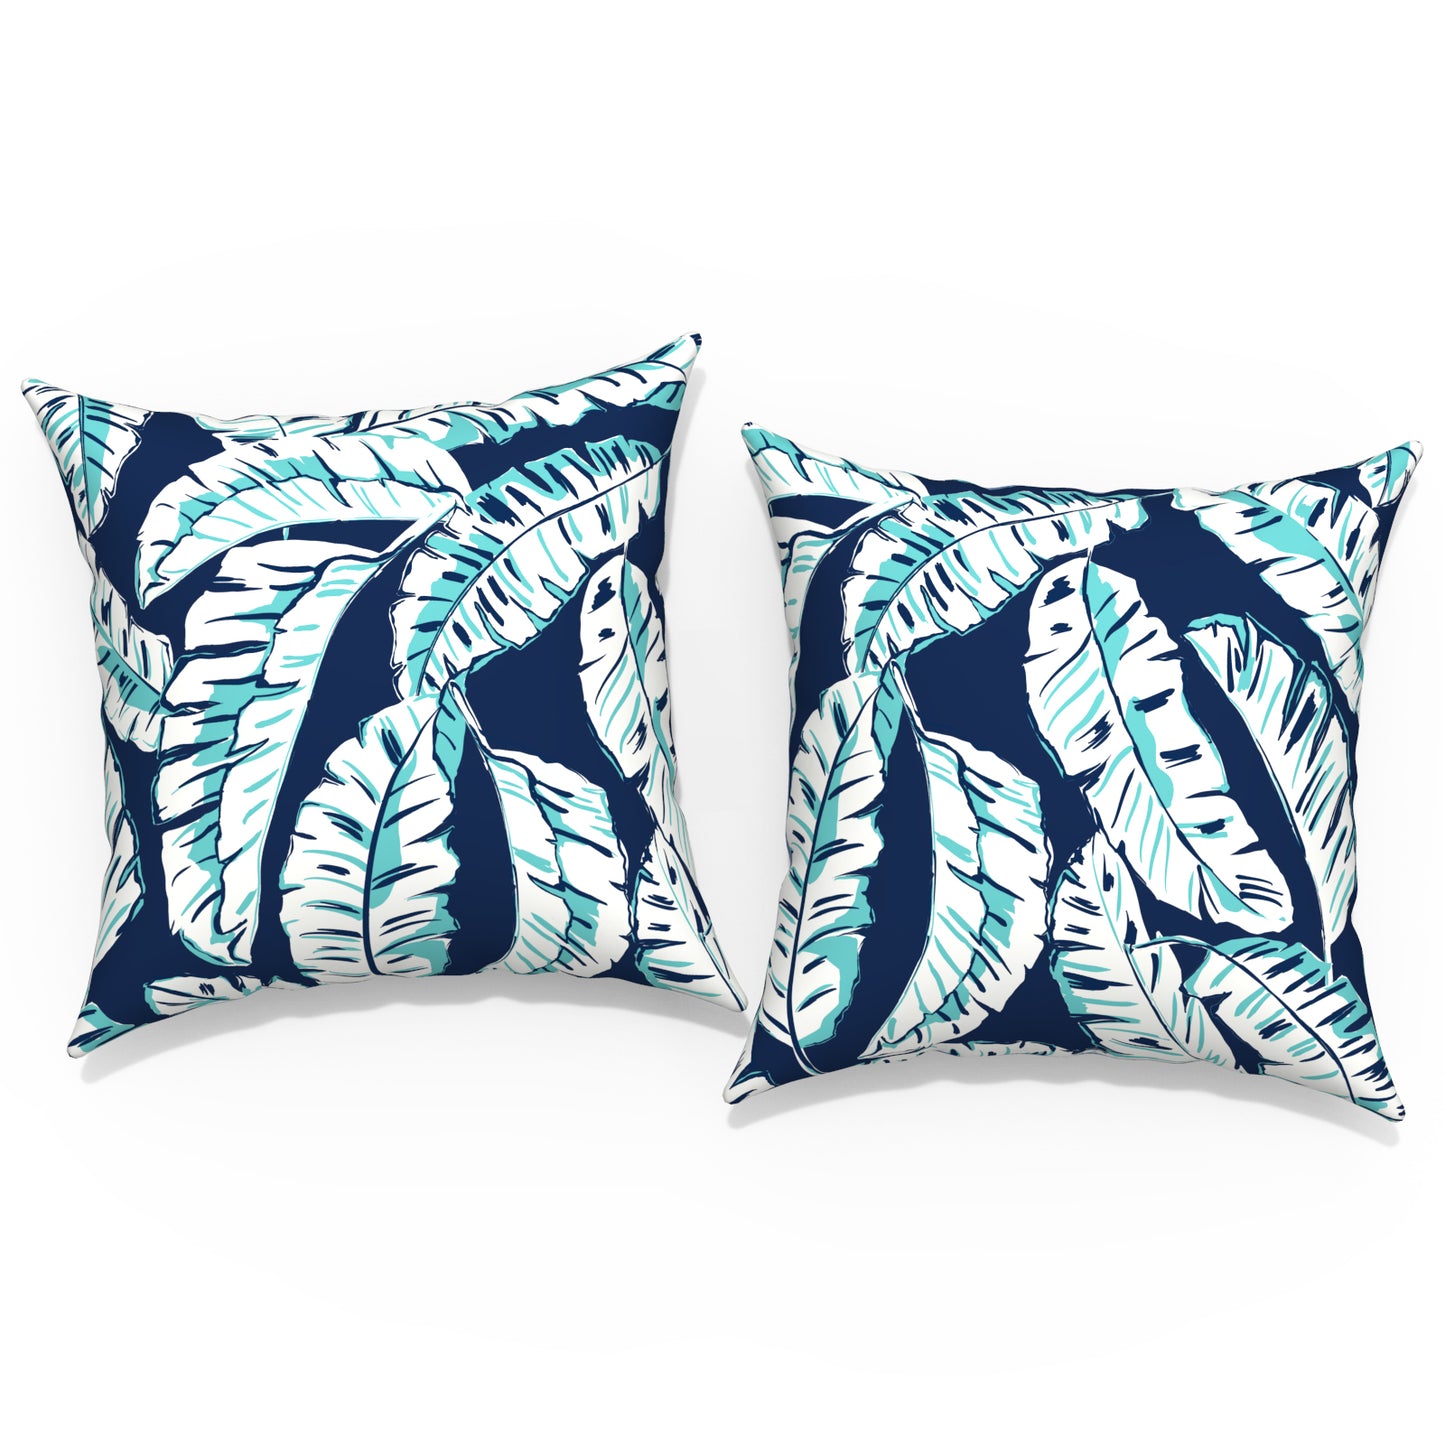 Melody Elephant Outdoor Throw Pillows 16x16 Inch, water Repellent patio pillows with Inners set of 2, outdoor pillows for patio furniture home garden, Baltic Palms White